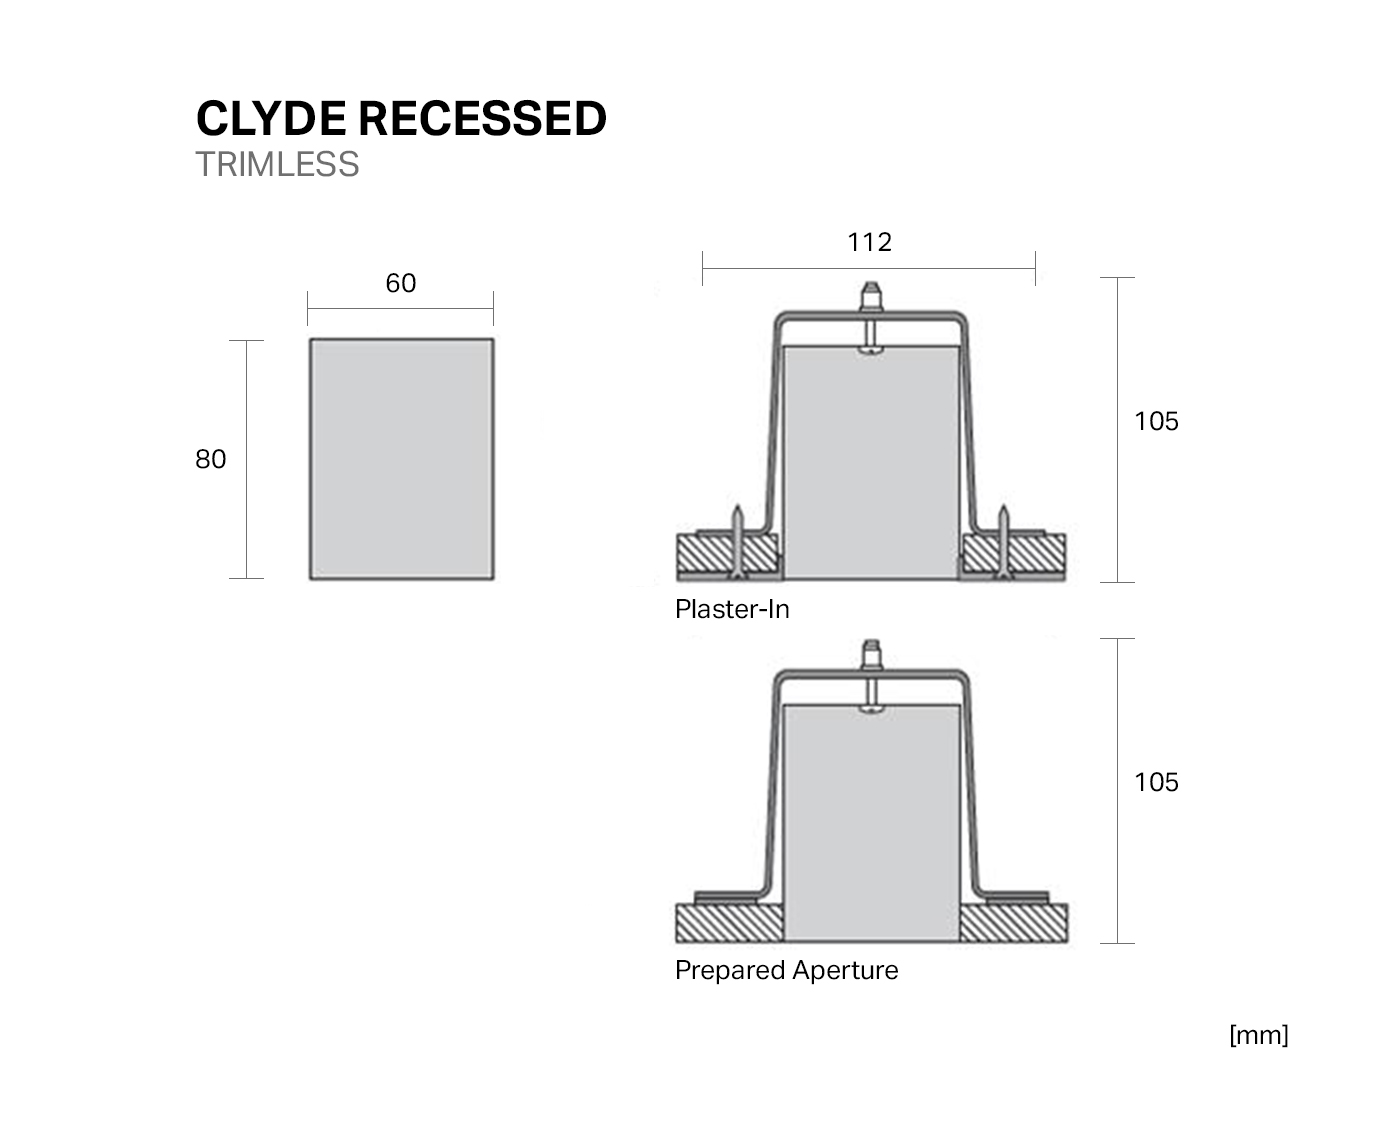 CLYDE-recessed-trimless-technical-drawing